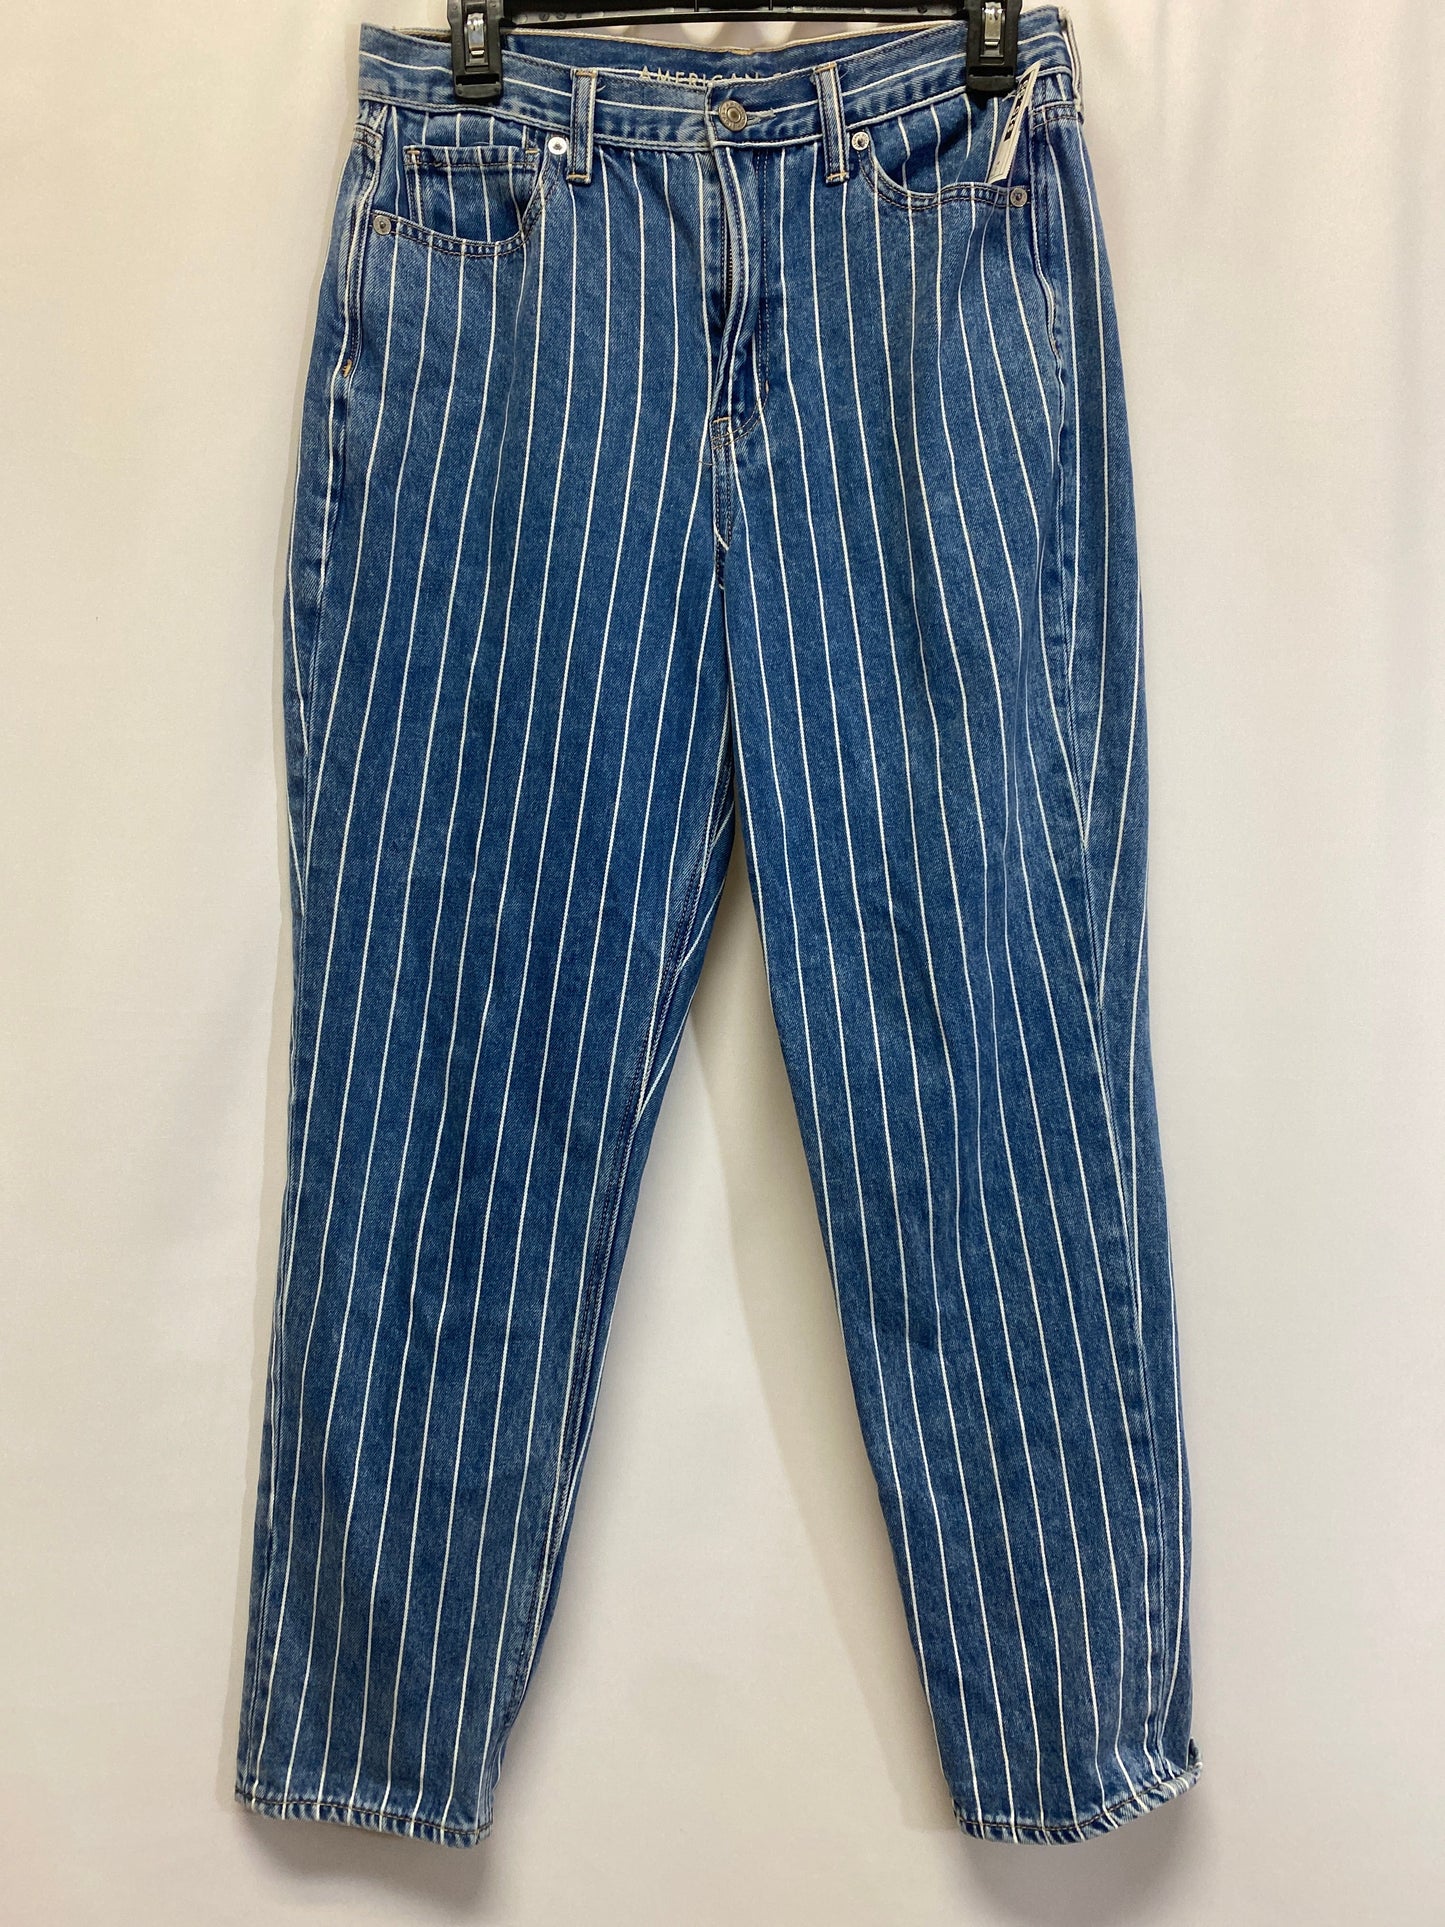 Blue Jeans Straight American Eagle, Size 8